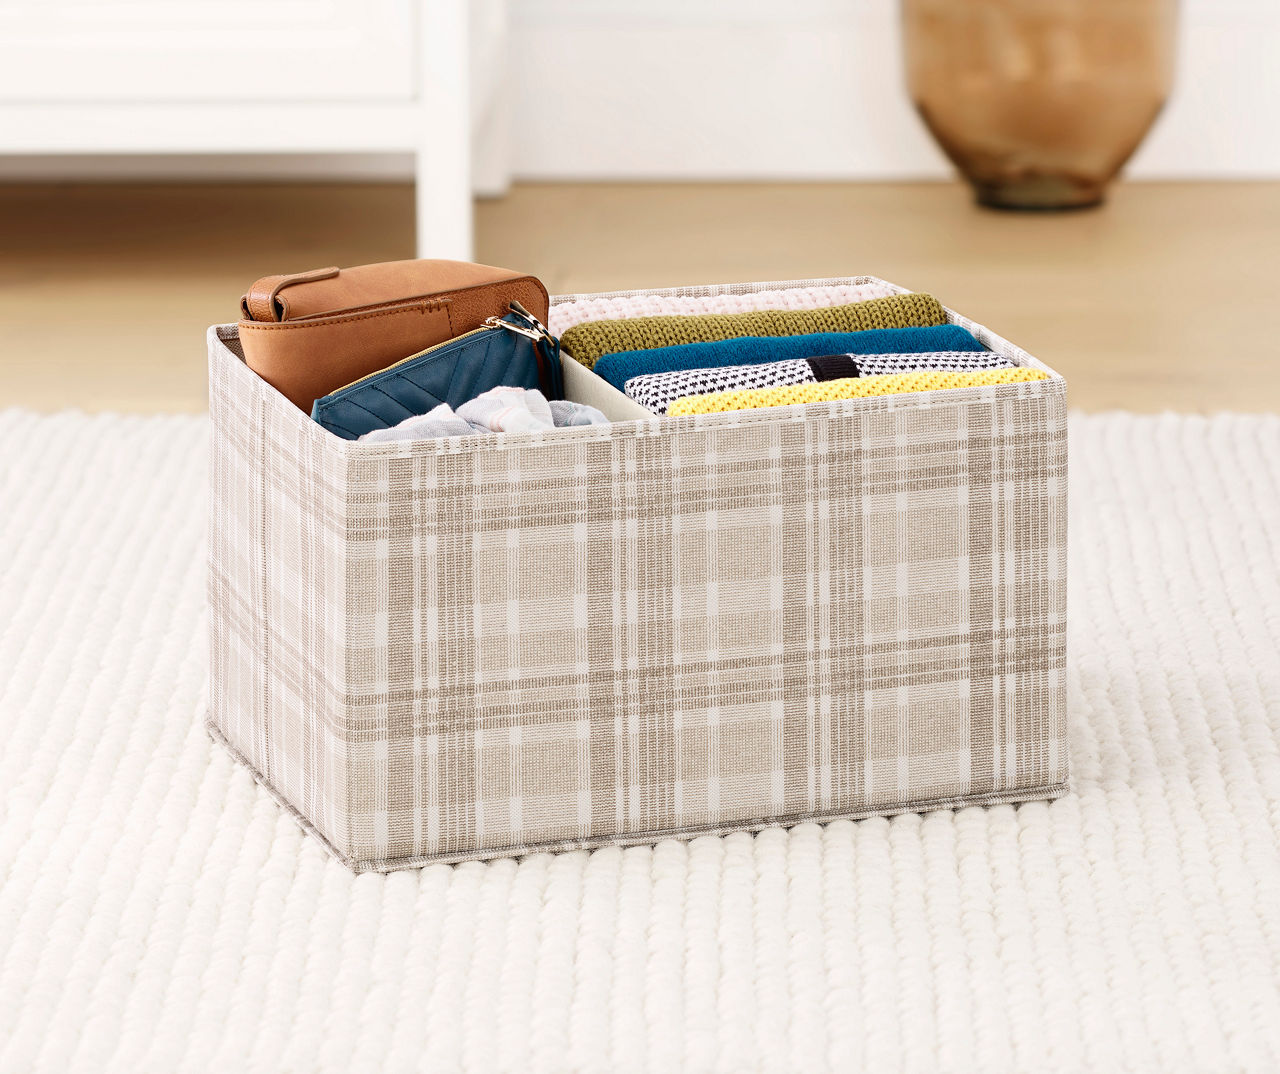 All The Totes & Baskets You Need To Organize Your Home